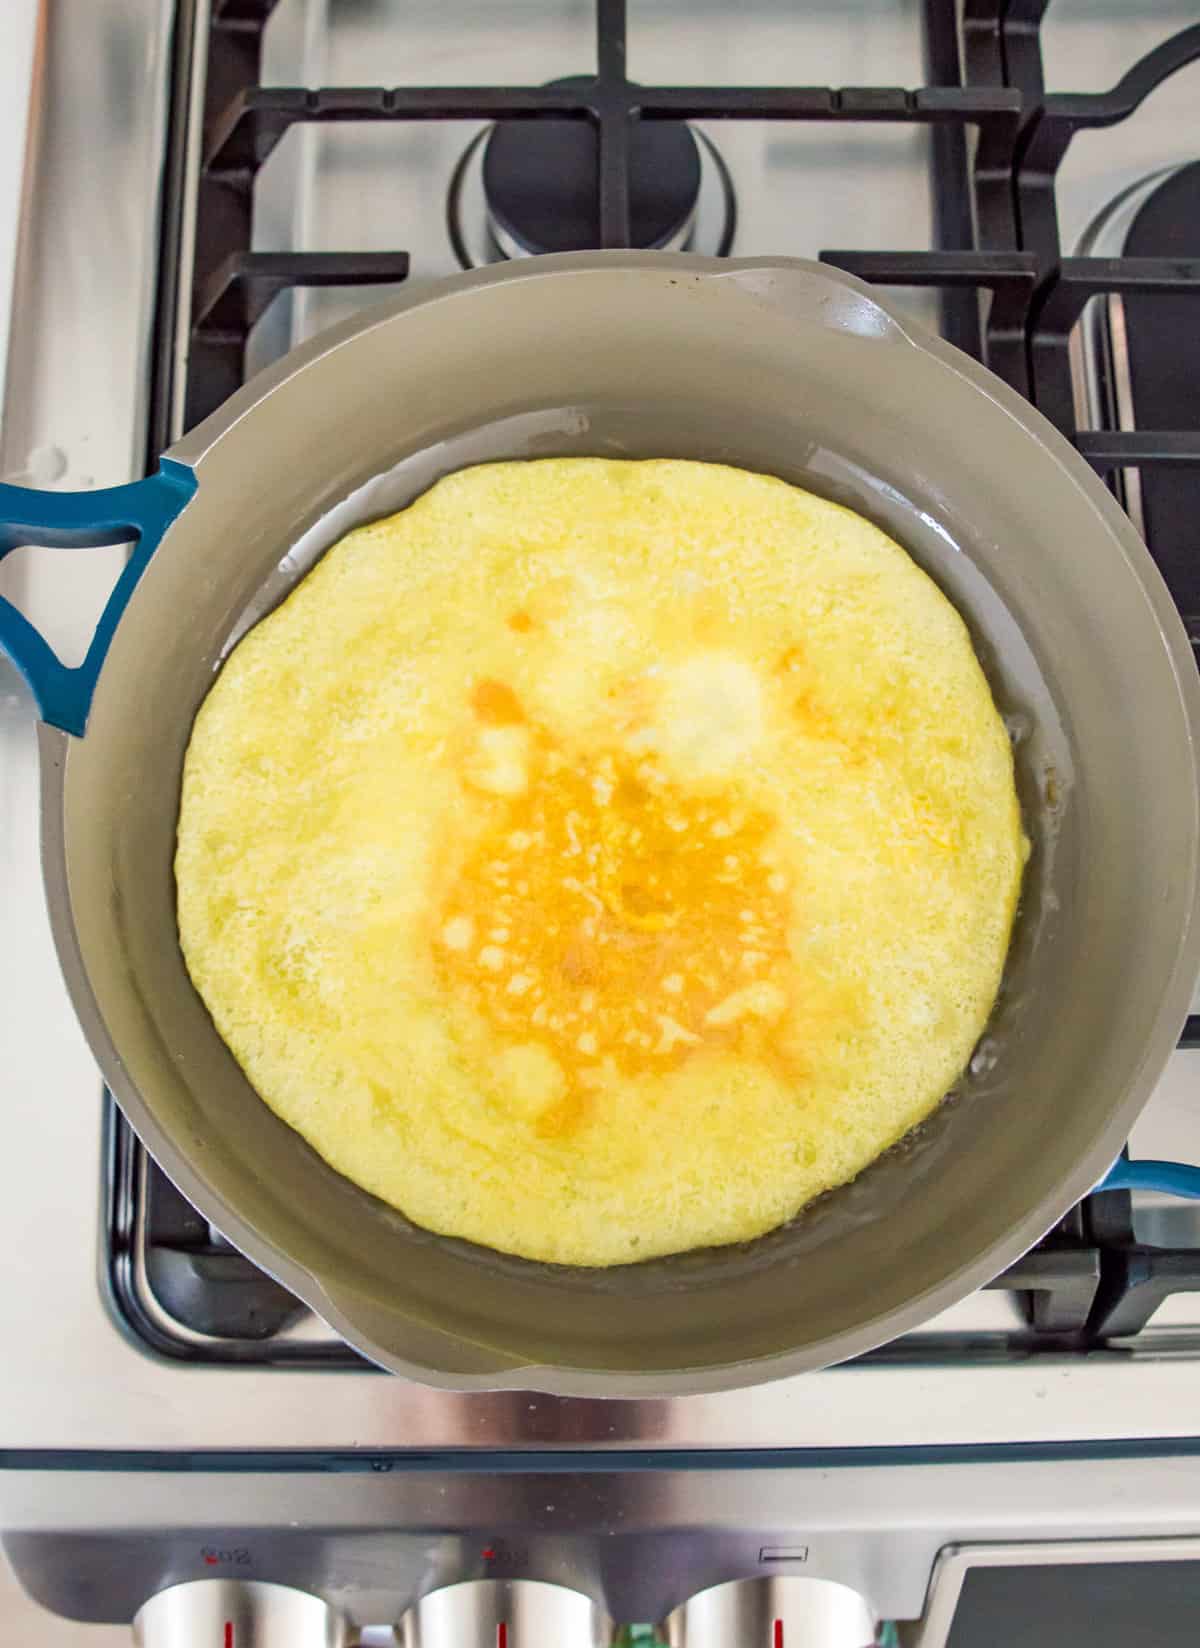 Eggs frying in a pan on a stovetop.